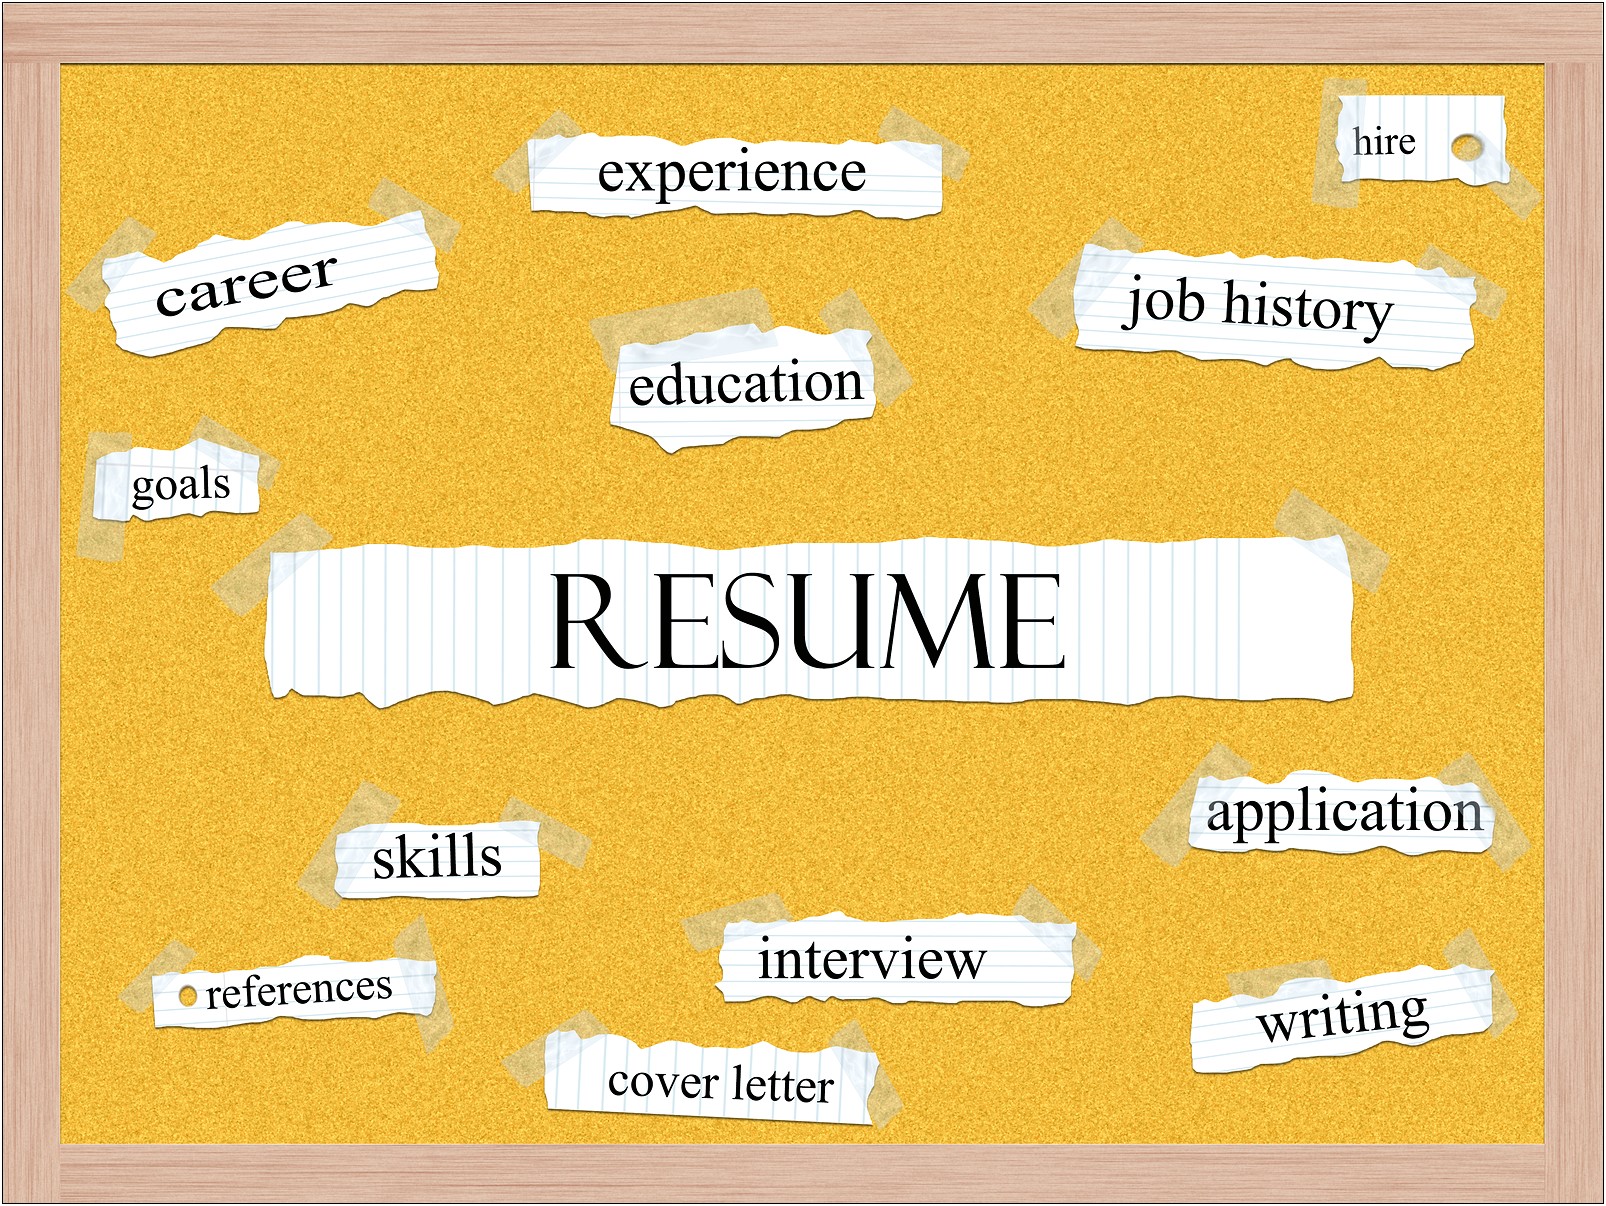 Resume Verb Tense For Current Job